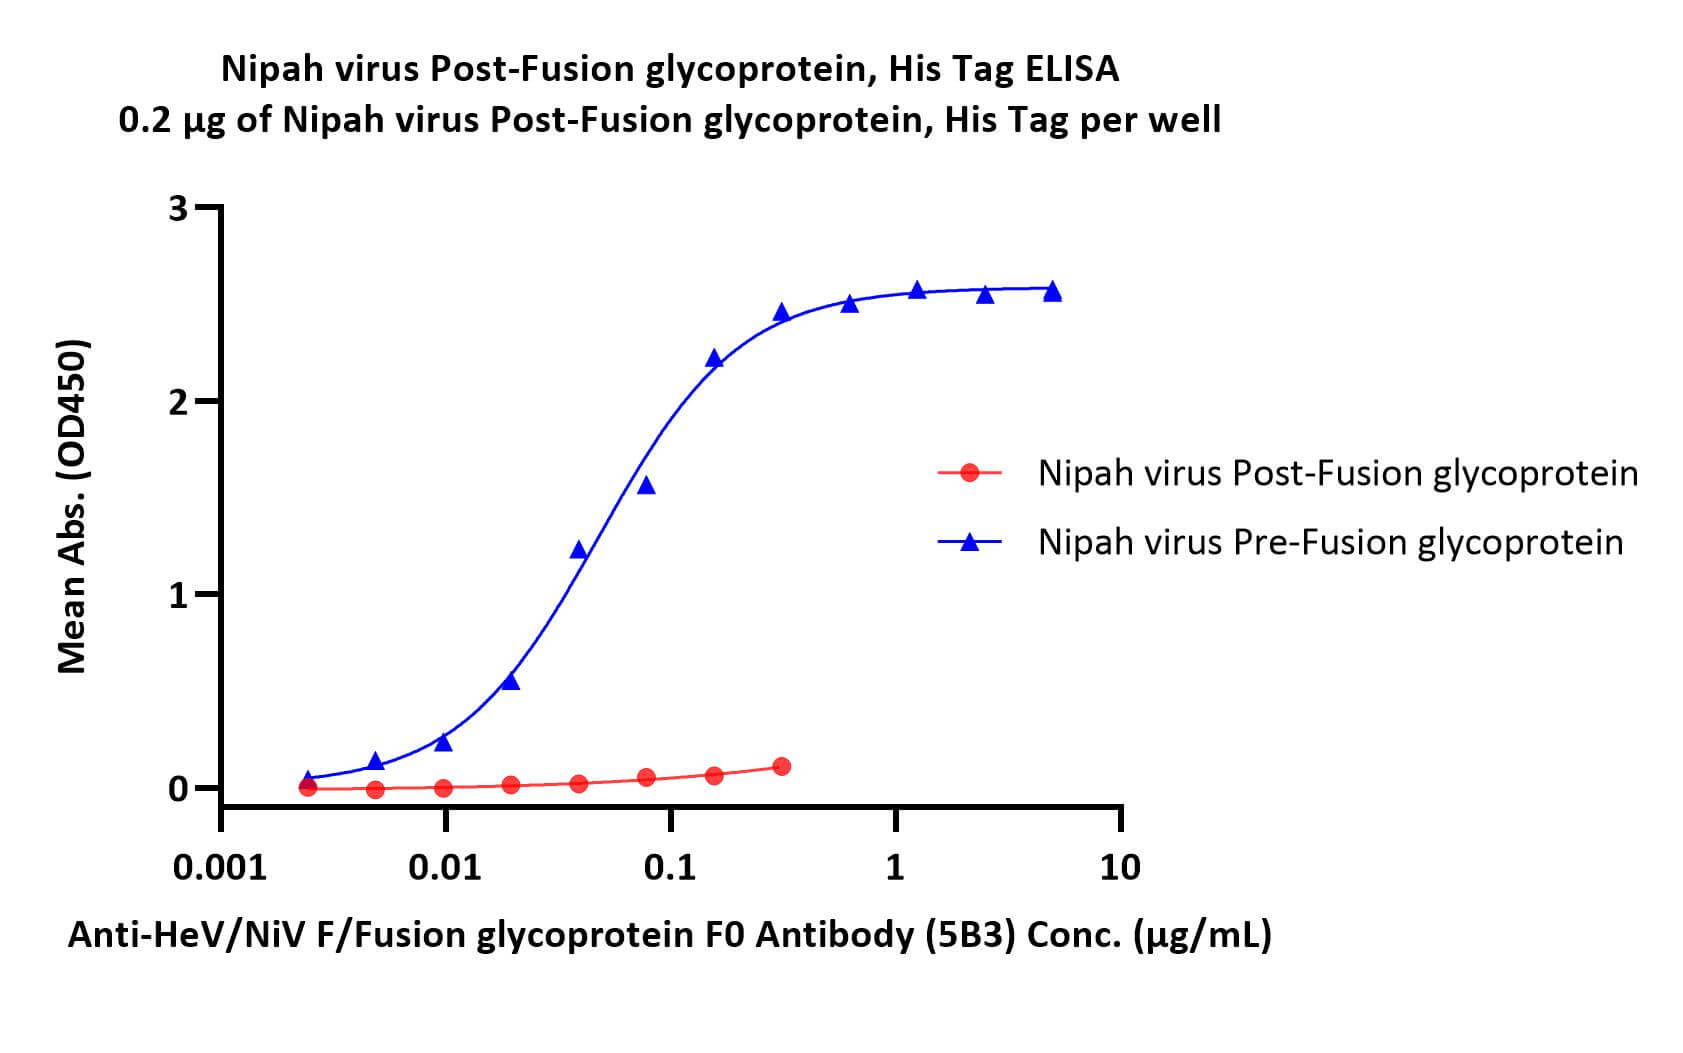 Post-Fusion glycoprotein ELISA